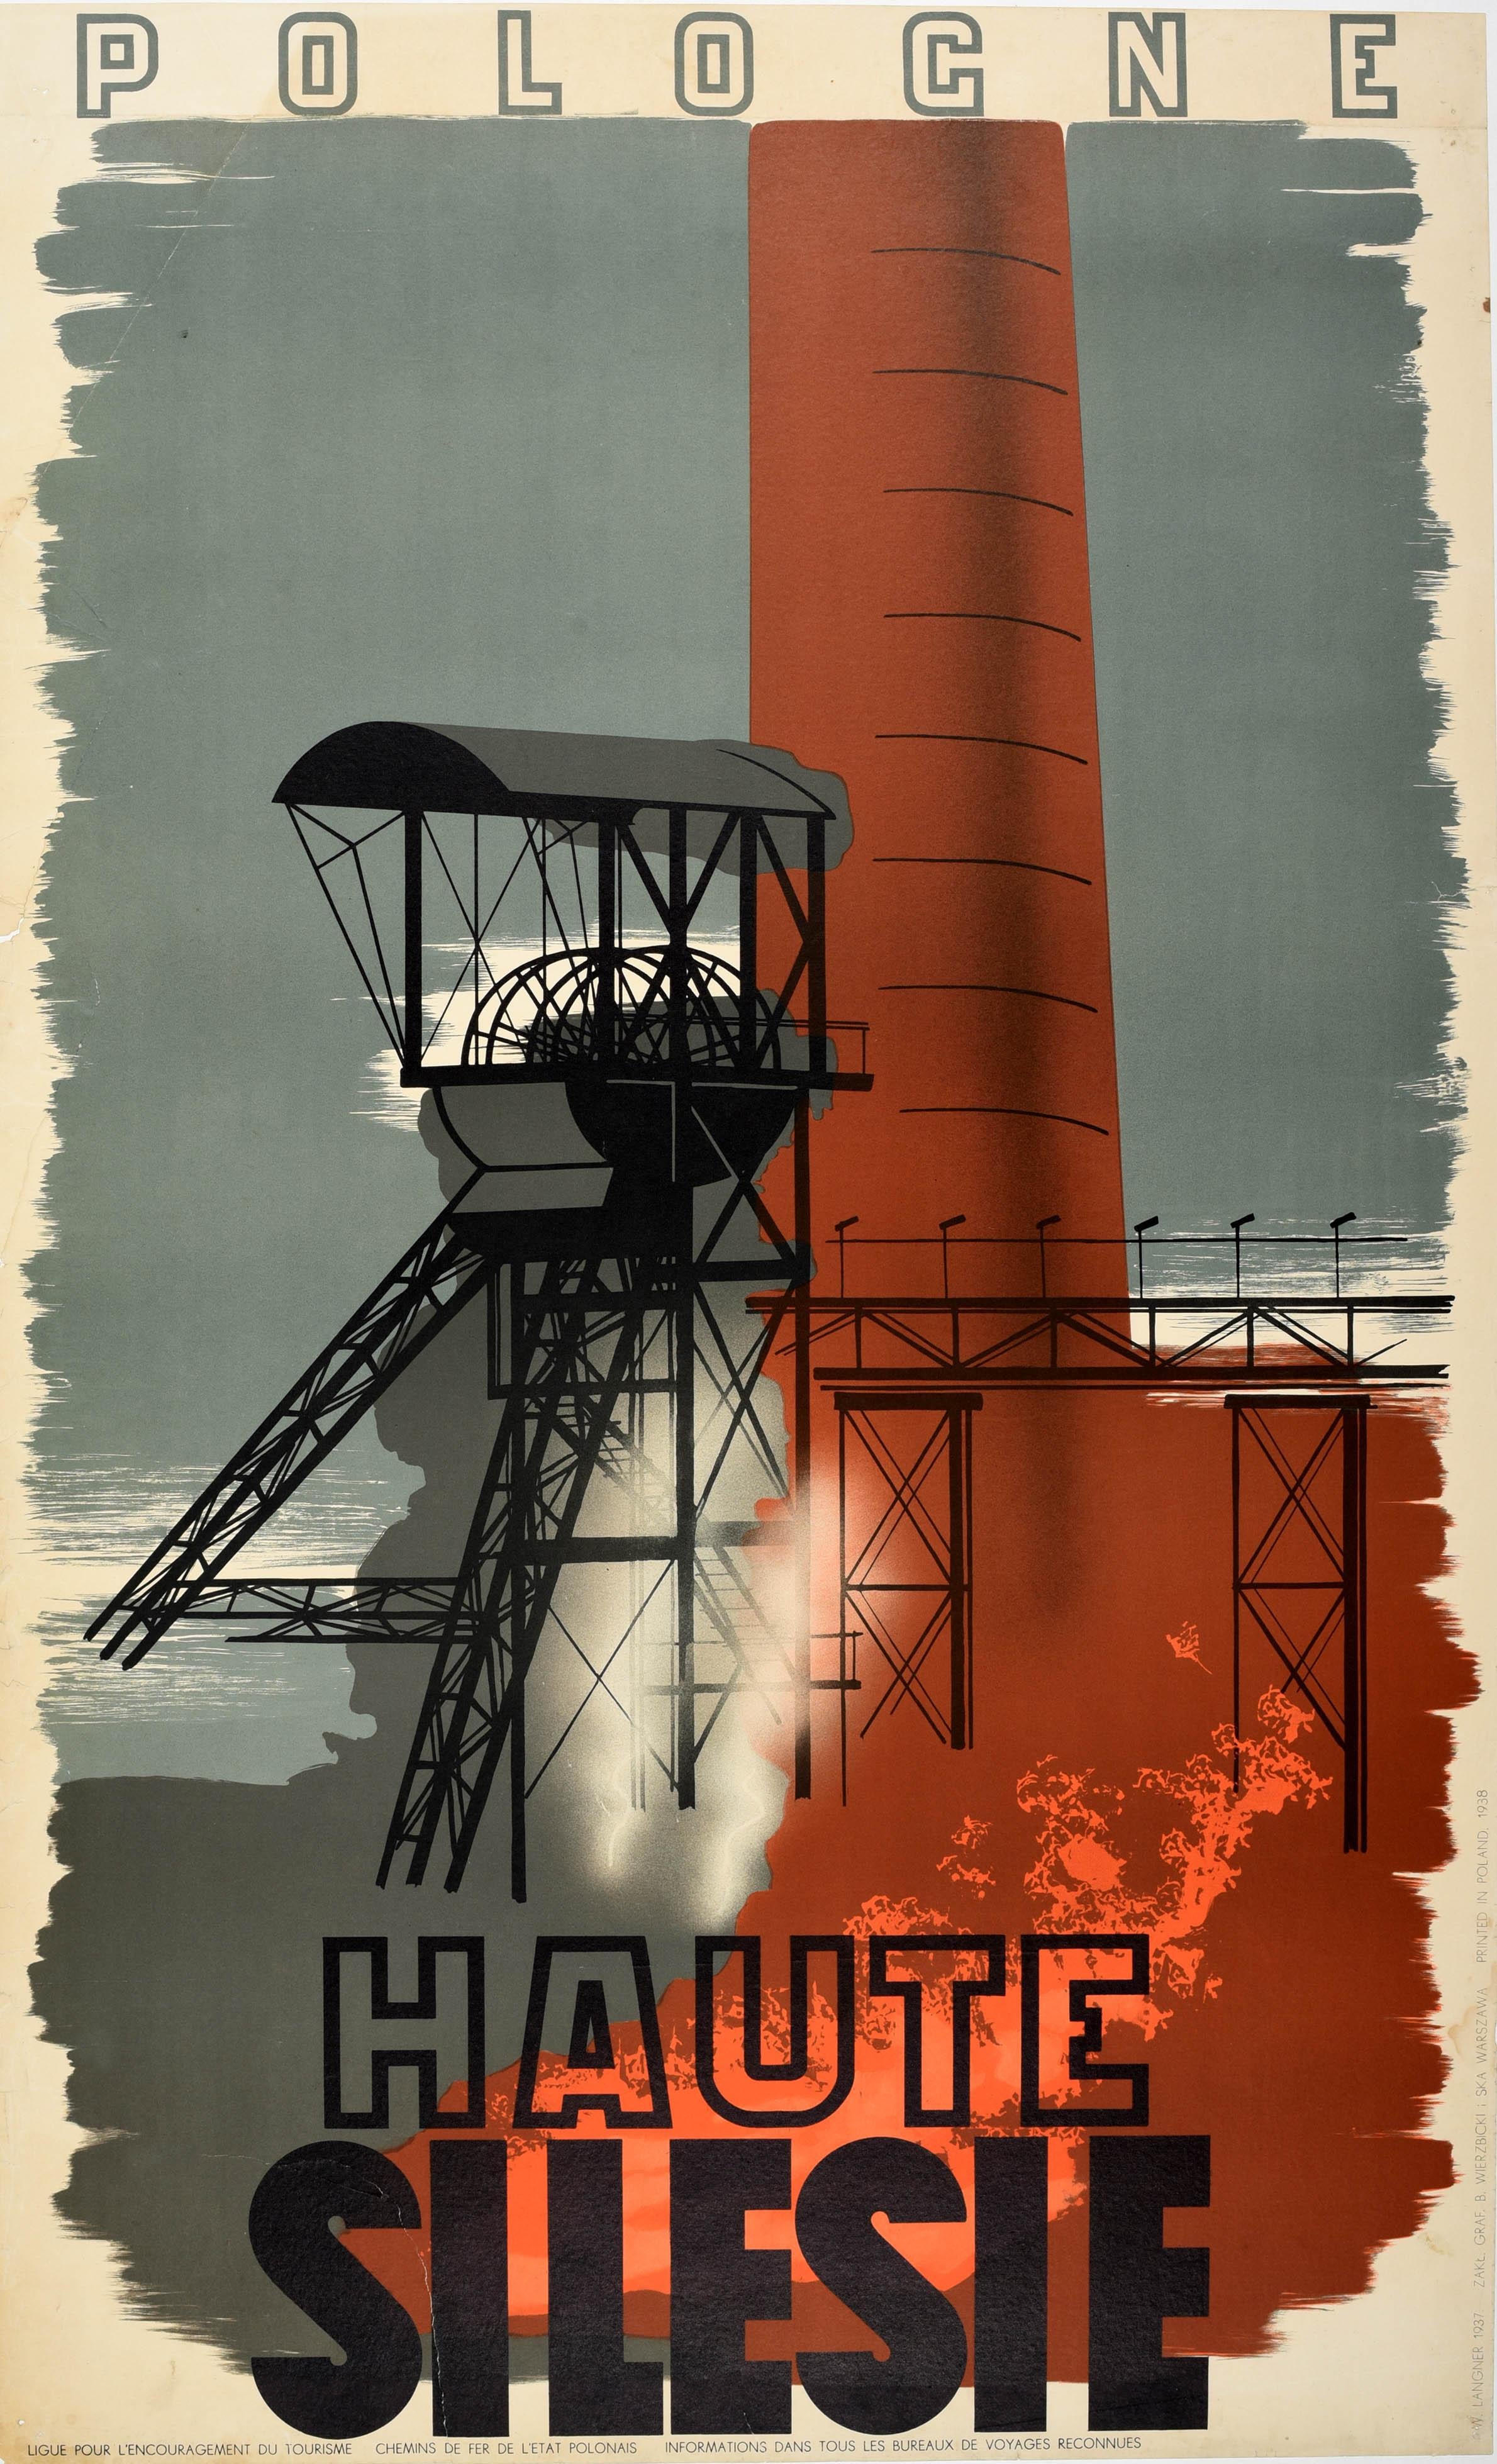 Original vintage Art Deco design travel poster for Poland Upper Silesia / Pologne Haute Silesie featuring a factory and rig with an industrial chimney on a grey background. The historic region of Upper Silesia is located mostly in Poland and crosses